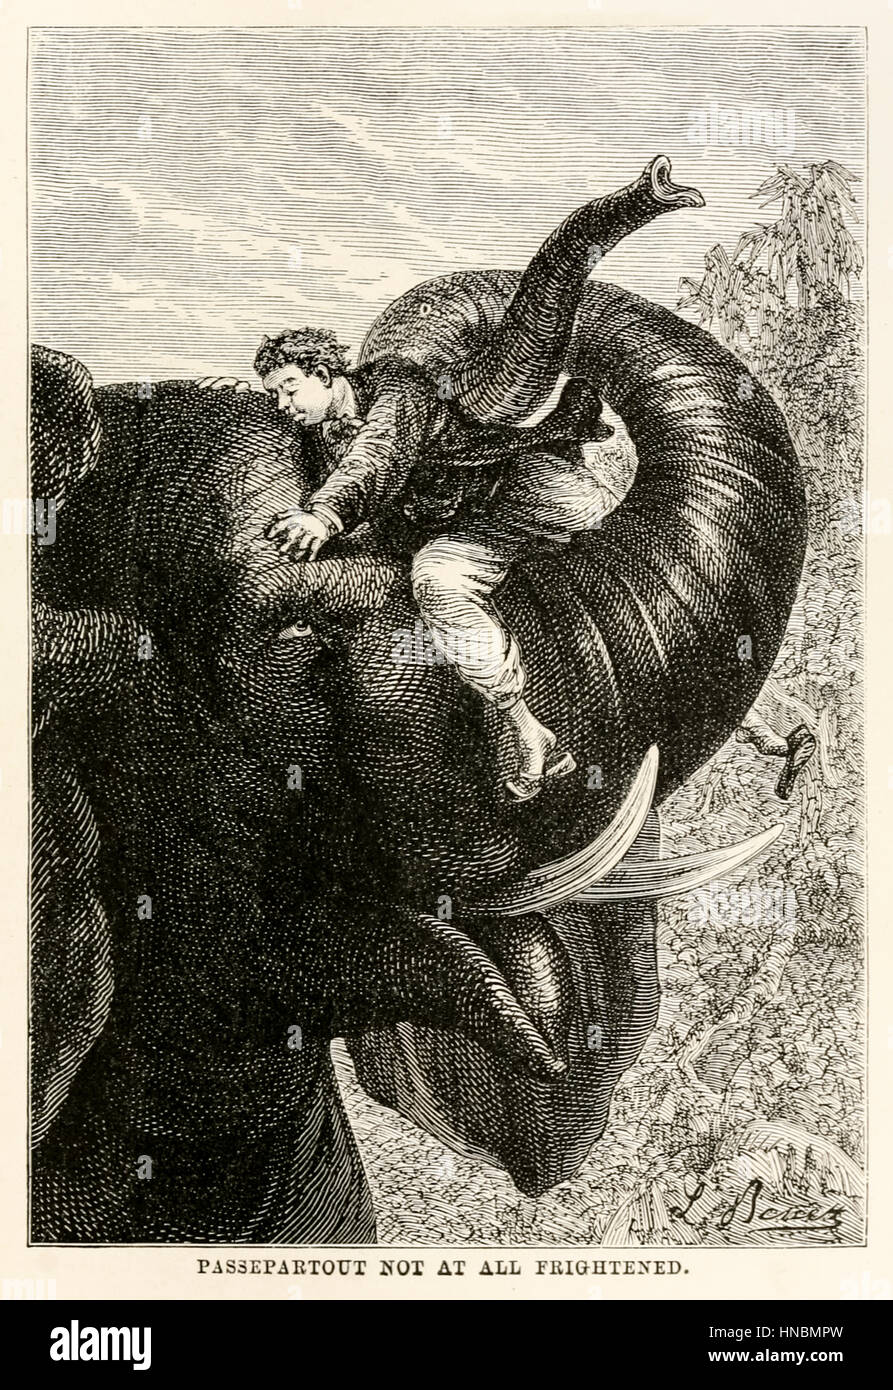 “Passepartout not at all frightened.” from ‘Around the World in Eighty Days’ by Jules Verne (1828-1905) published in 1873 with illustrations by Alphonse-Marie-Adolphe de Neuville (1835-1885) and Léon Benett (1839-1917) and engravings by Louis Dumont (born 1822) and Adolphe François Pannemaker (1822-1900). Stock Photo